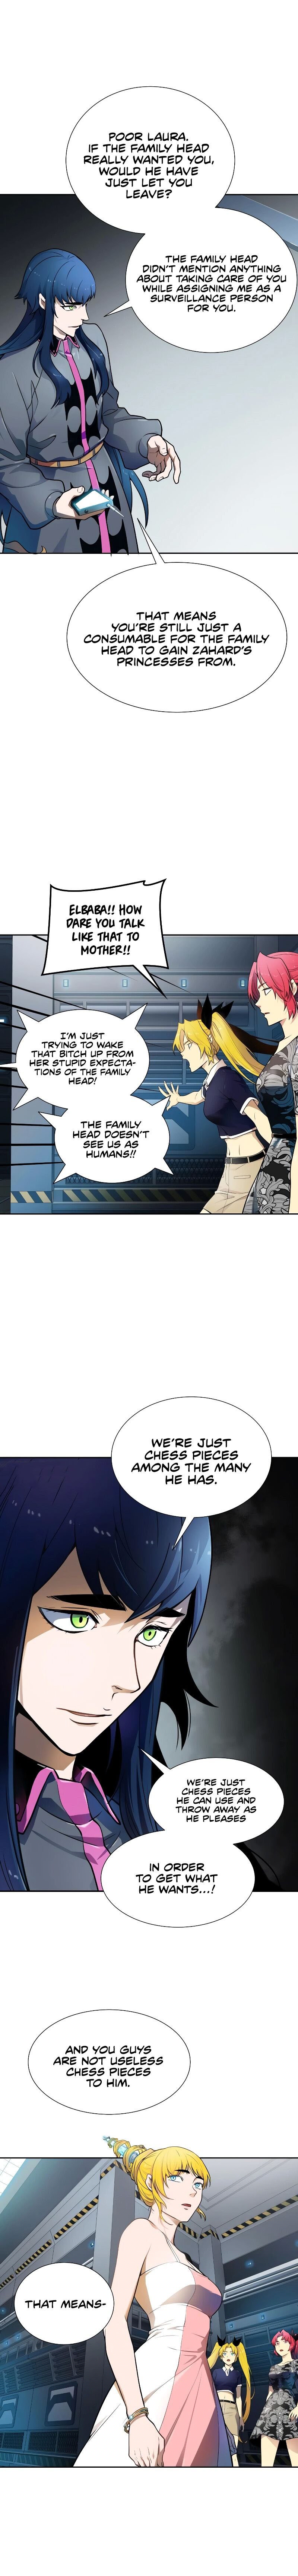 Tower Of God 578 19